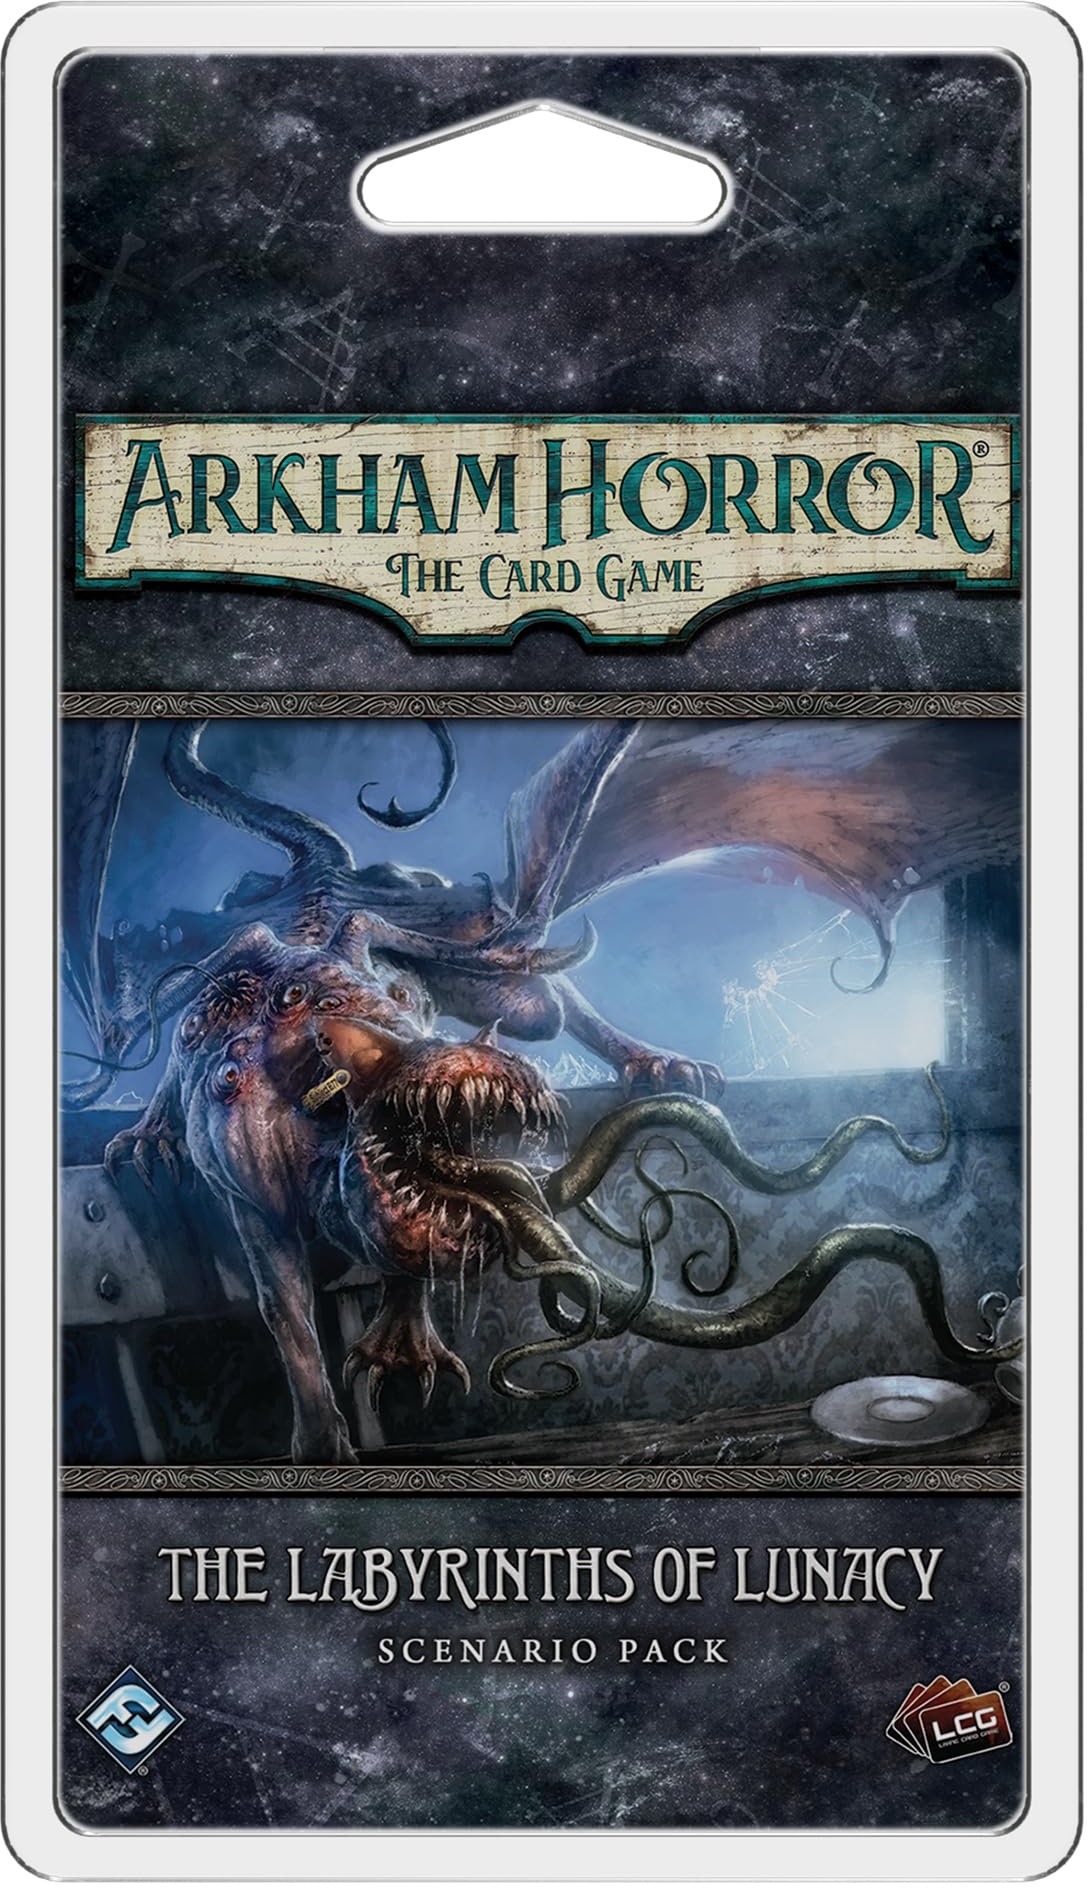 Fantasy Flight Games, Arkham Horror The Card Game: Scenario Pack - 3. The Labyrinths of Lunacy, Card Game, Ages 14+, 1 to 4 Players, 60 to 120 Minutes Playing Time